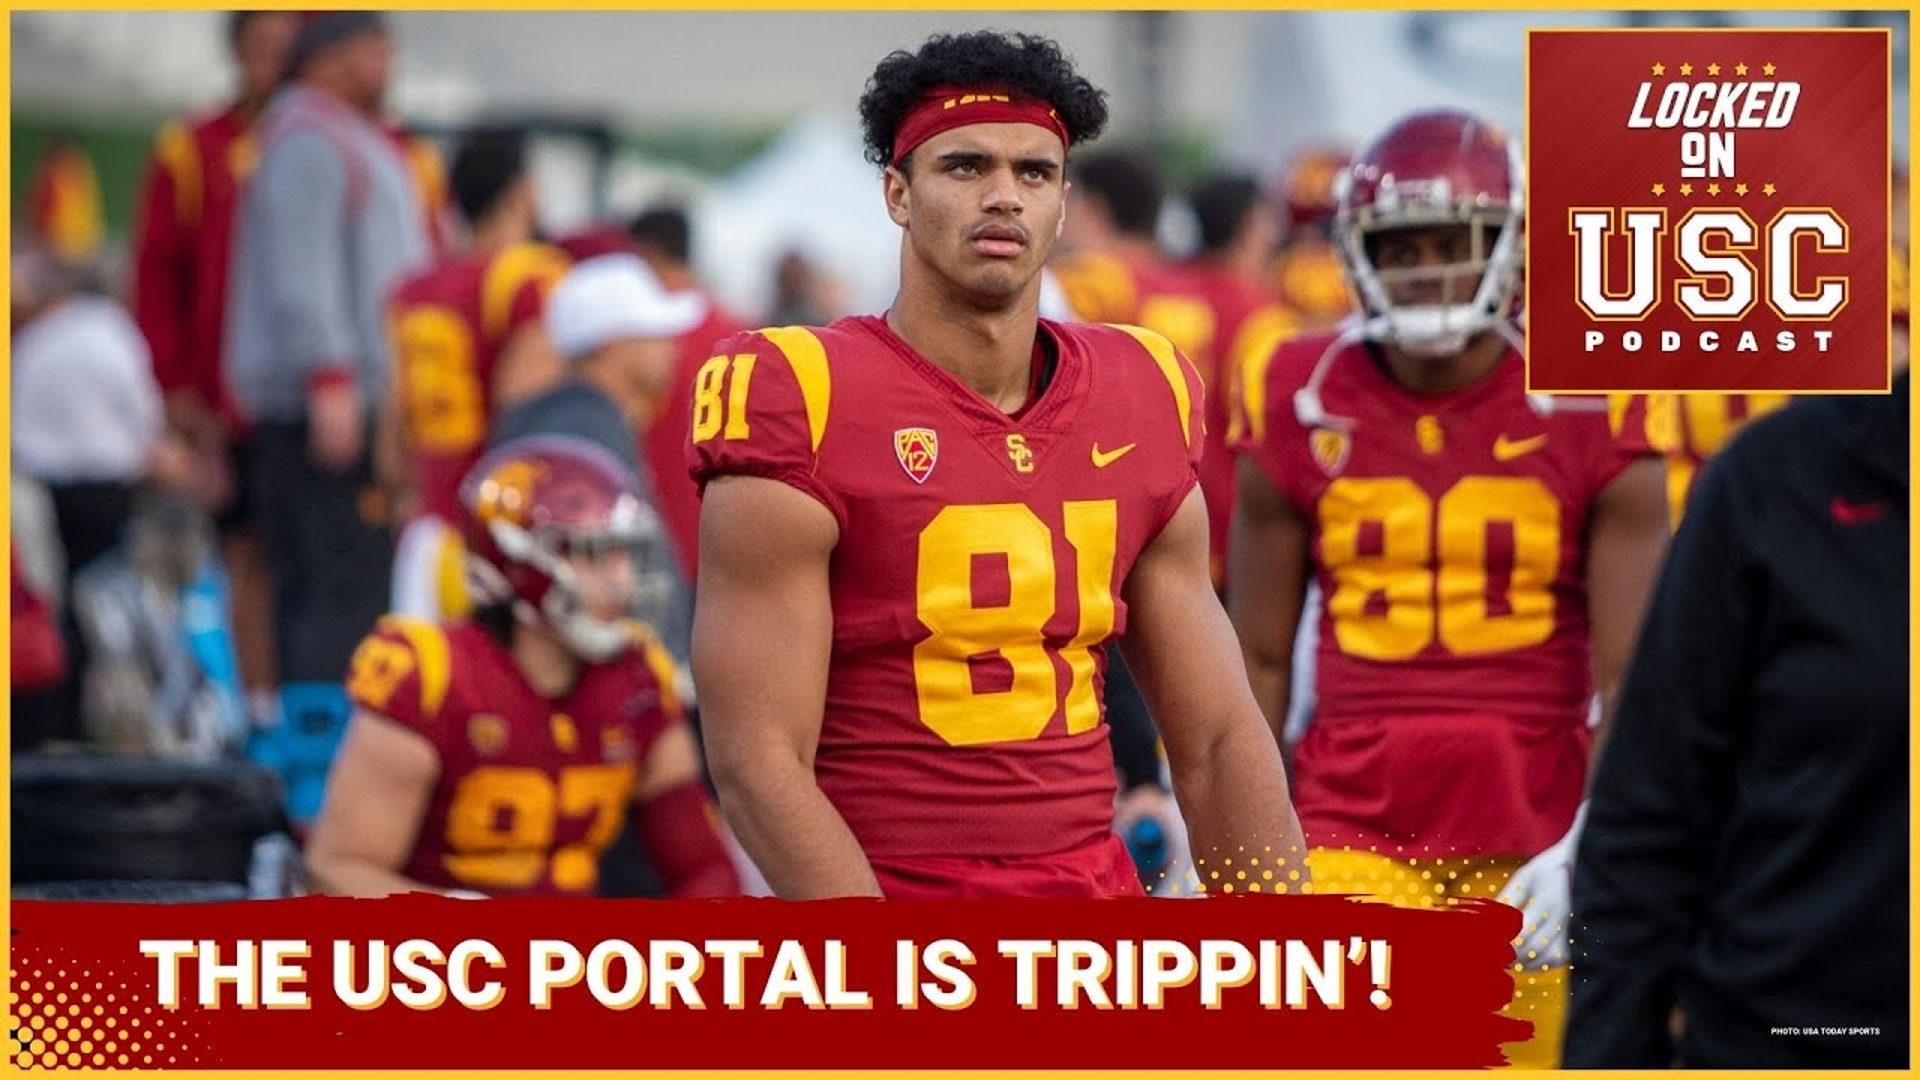 You're a Trojan for life. USC WR turned UCLA WR Kyle Ford is back wearing the Cardinal & Gold.